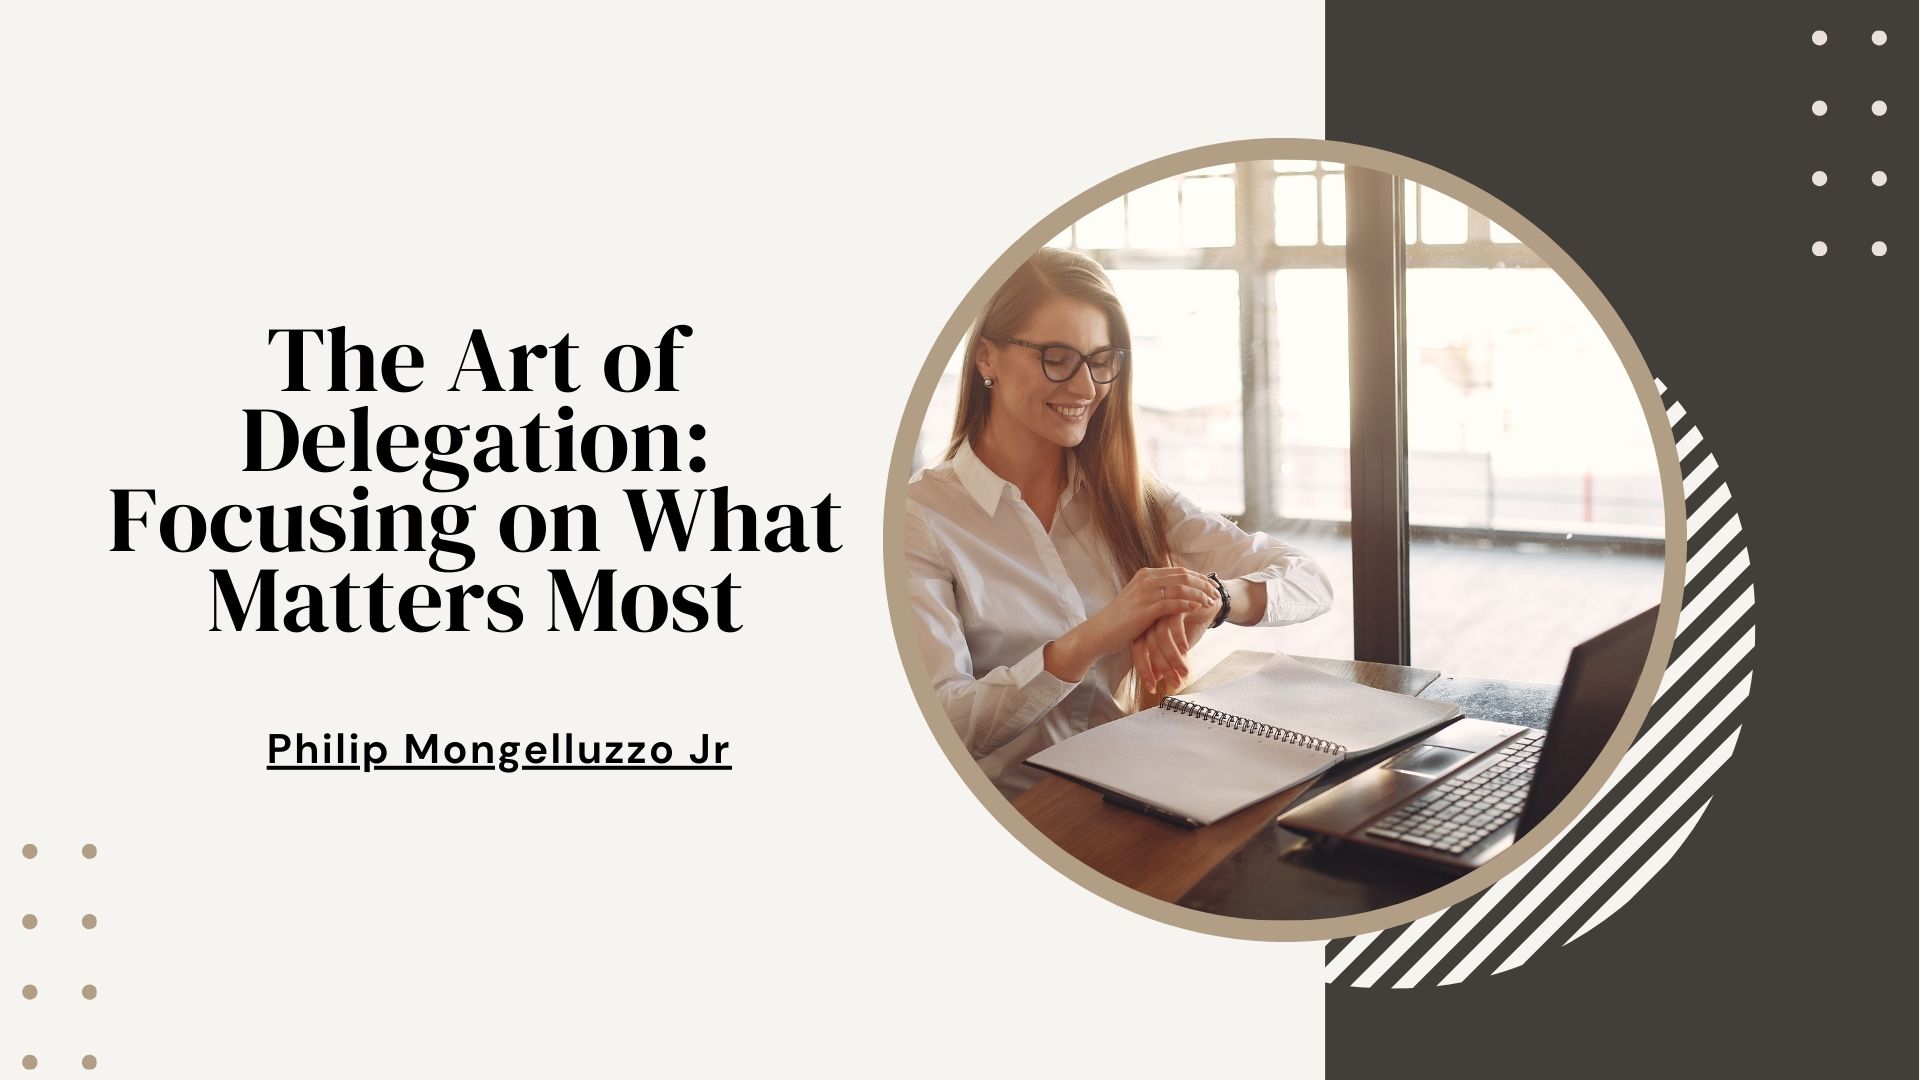 The Art of
Delegation:
Focusing on What
Matters Most

Philip Mongelluzzo Jr